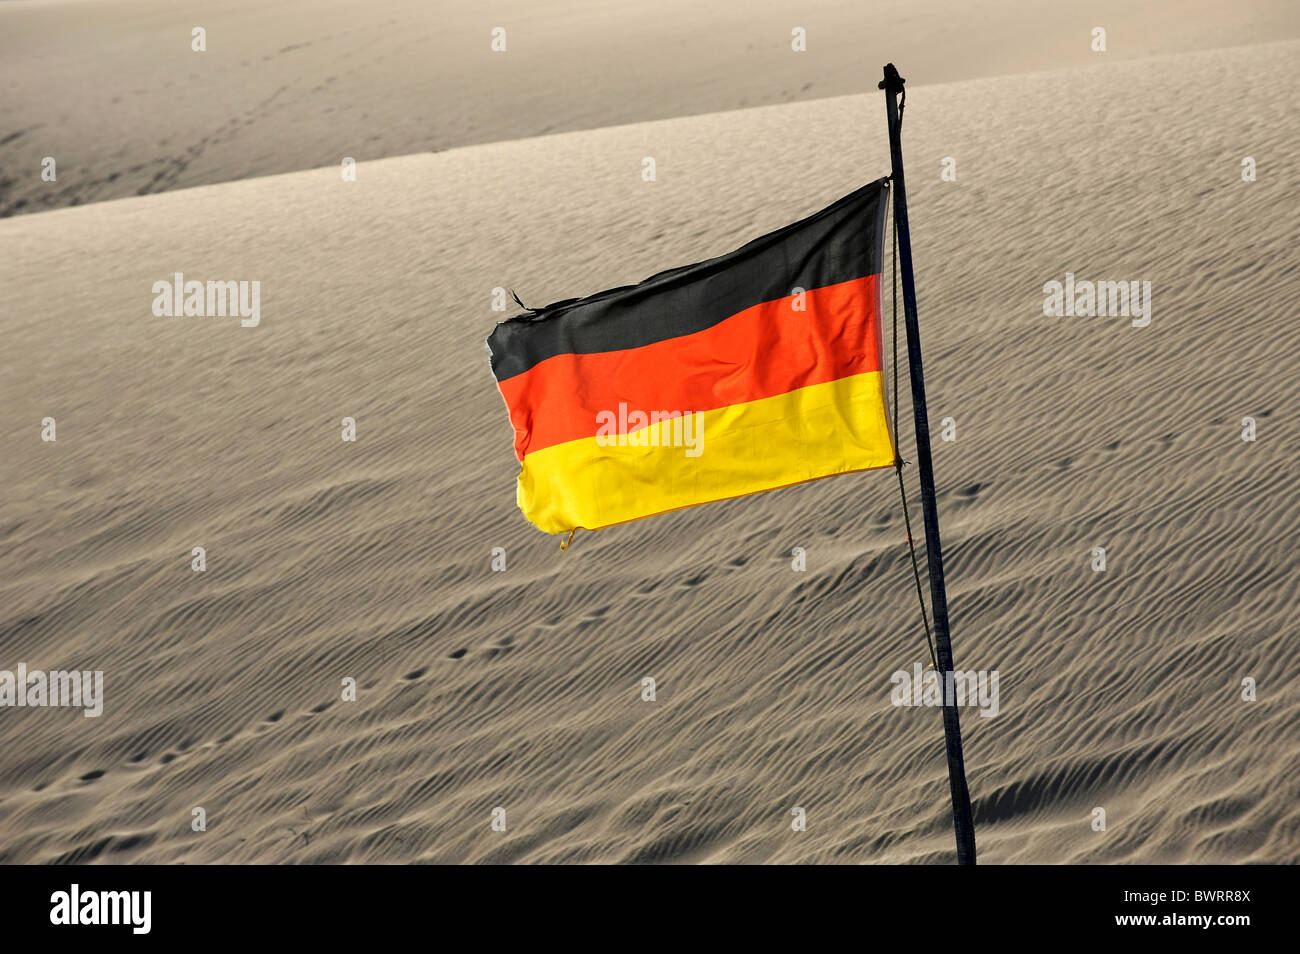 German flag blowing in the desert sand Stock Photo